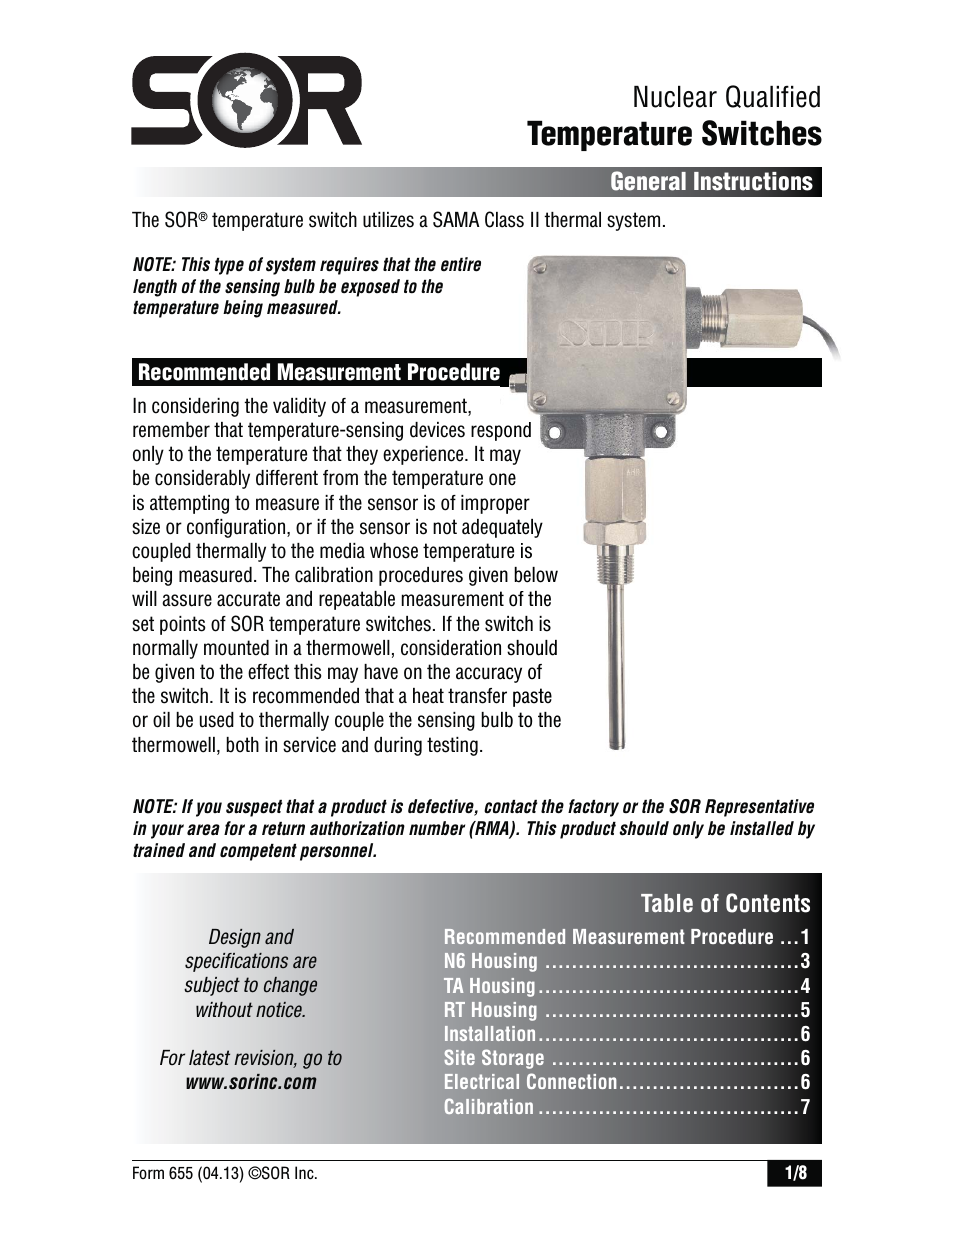 RT Nuclear Qualified Temperature Switch (Page 1)